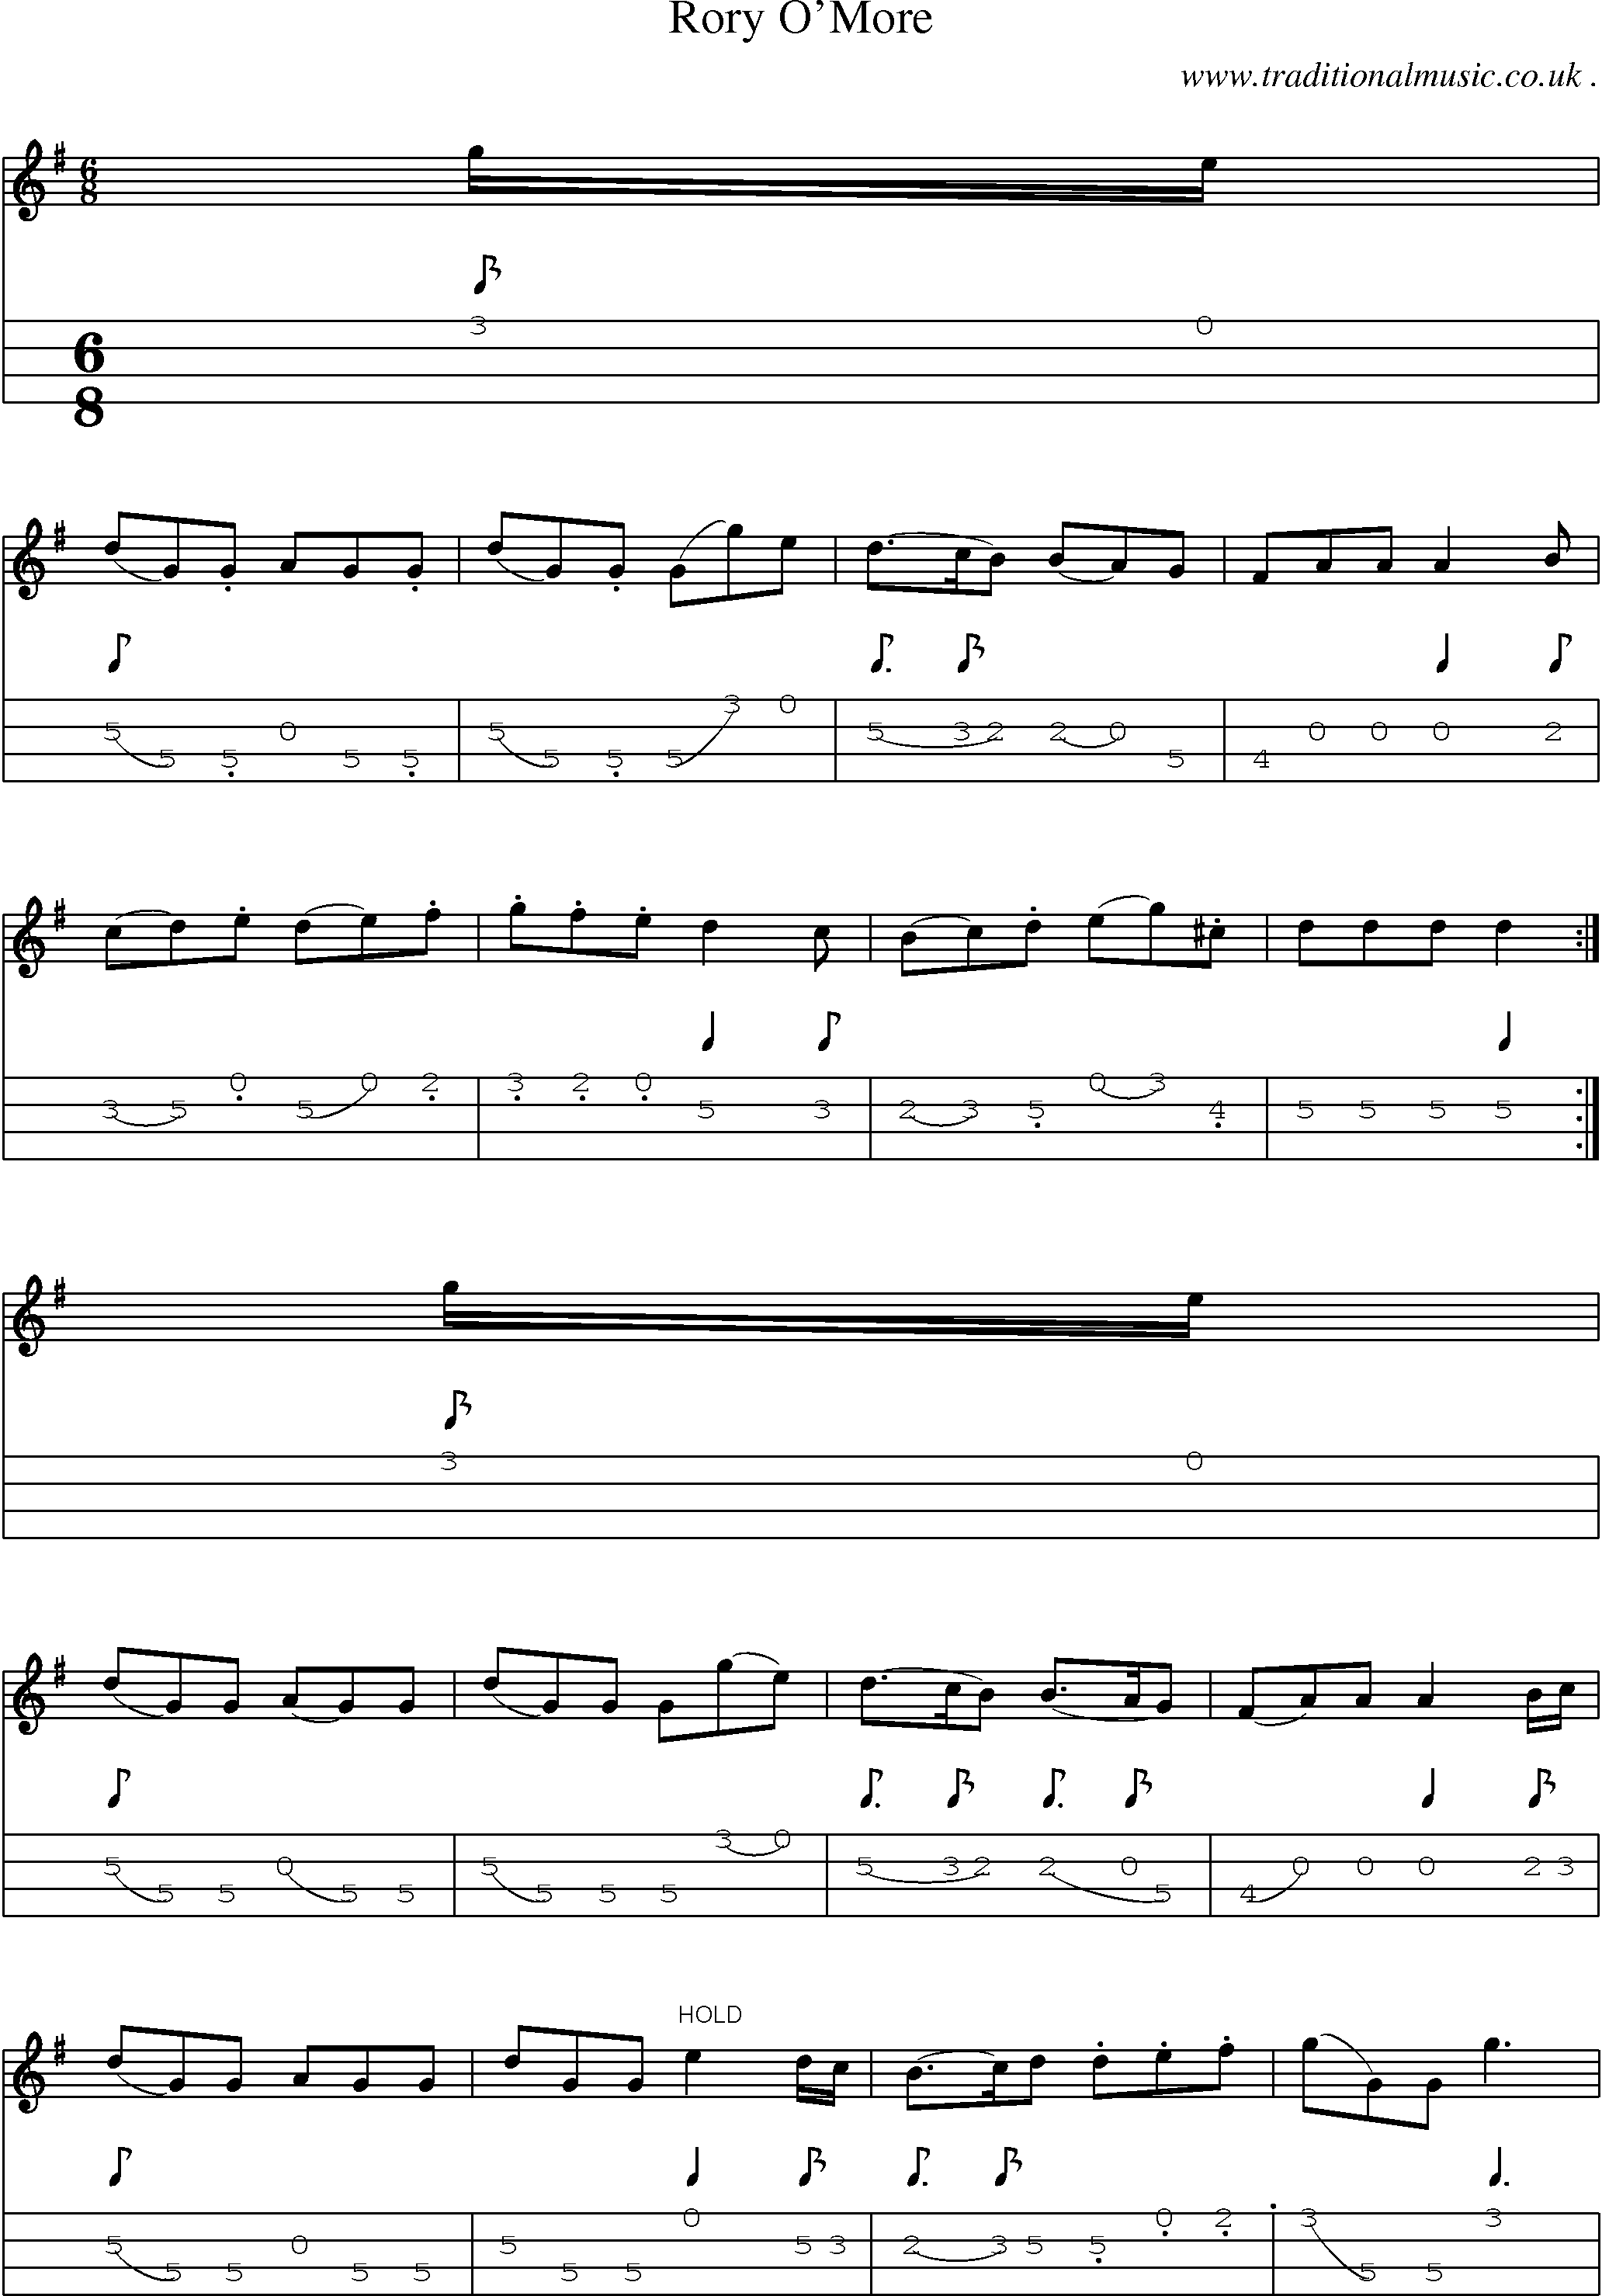 Sheet-Music and Mandolin Tabs for Rory Omore